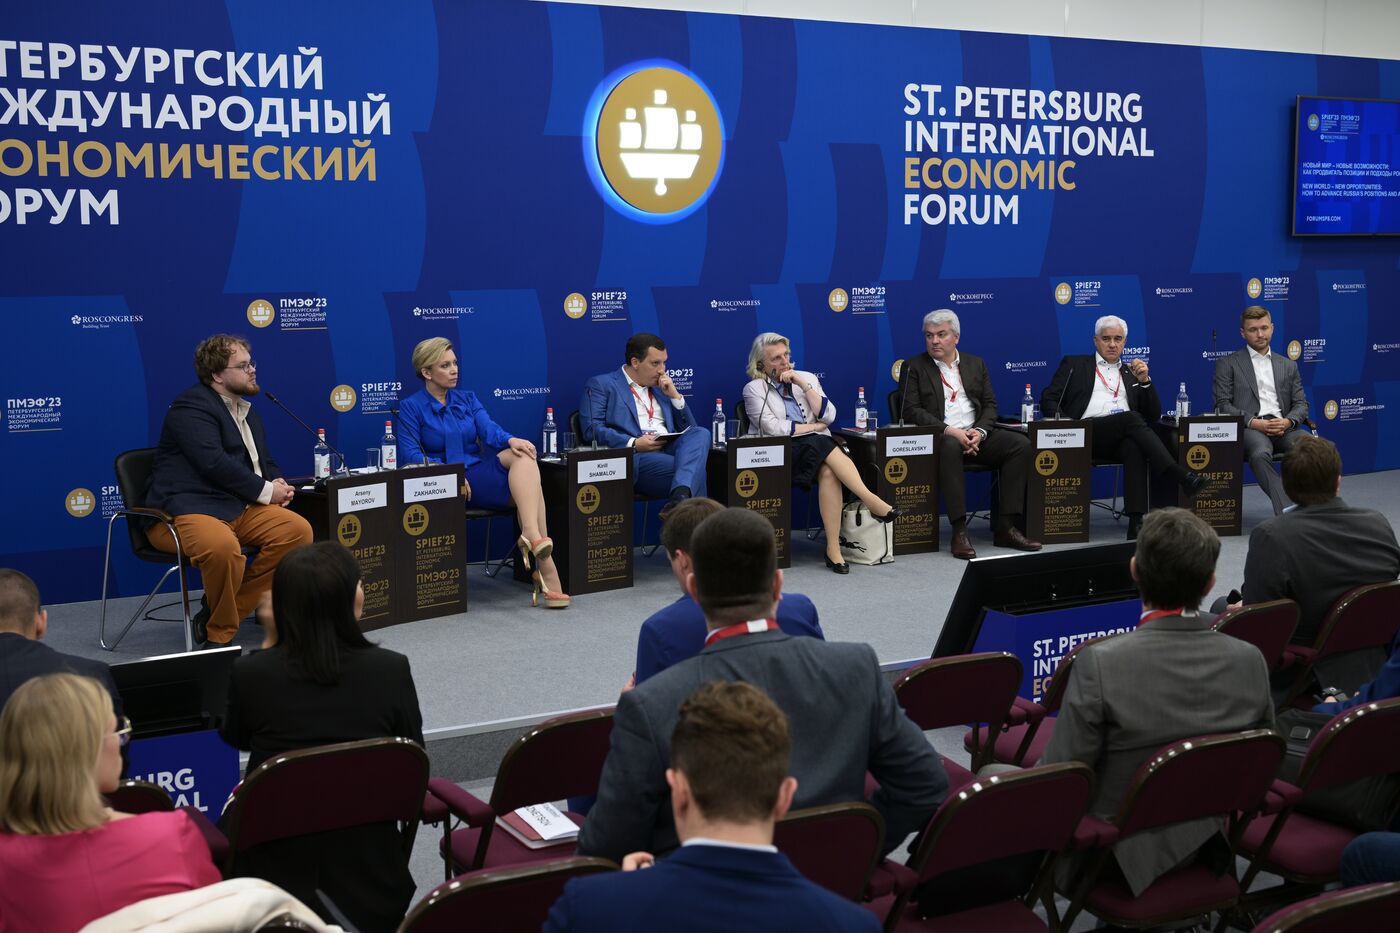 SPIEF-2023. New World – New Opportunities: How to Advance Russia’s Positions and Approaches Abroad